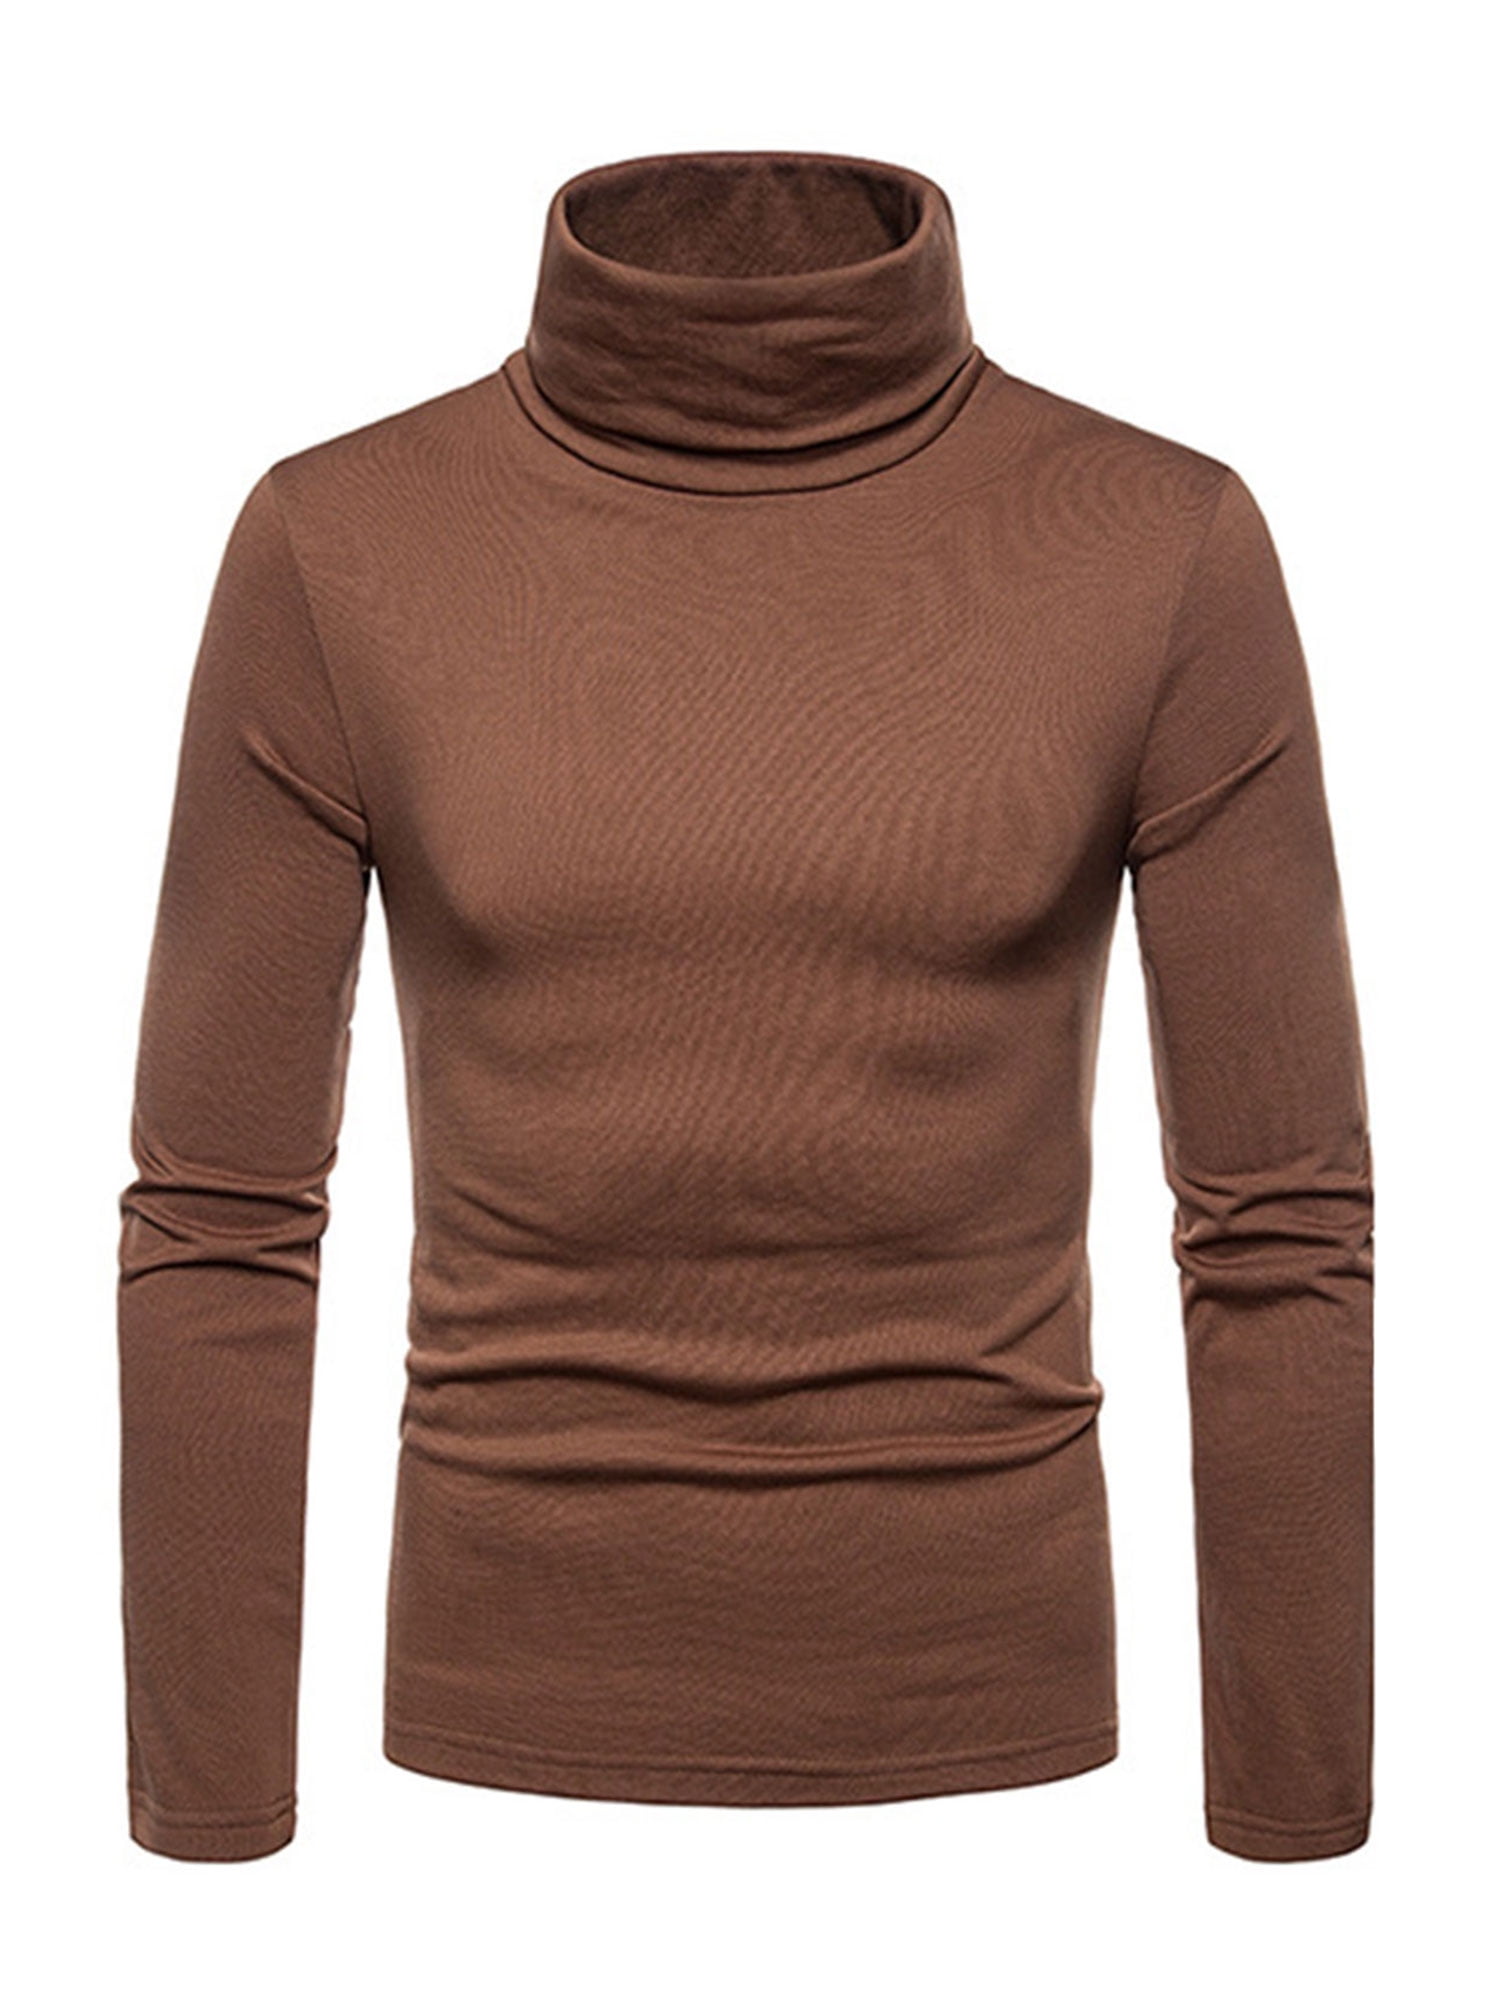 Mens Roll Turtle Neck Pullover Jumper Tops Warm Slim Fit Base Layer T Shirt 2XL 